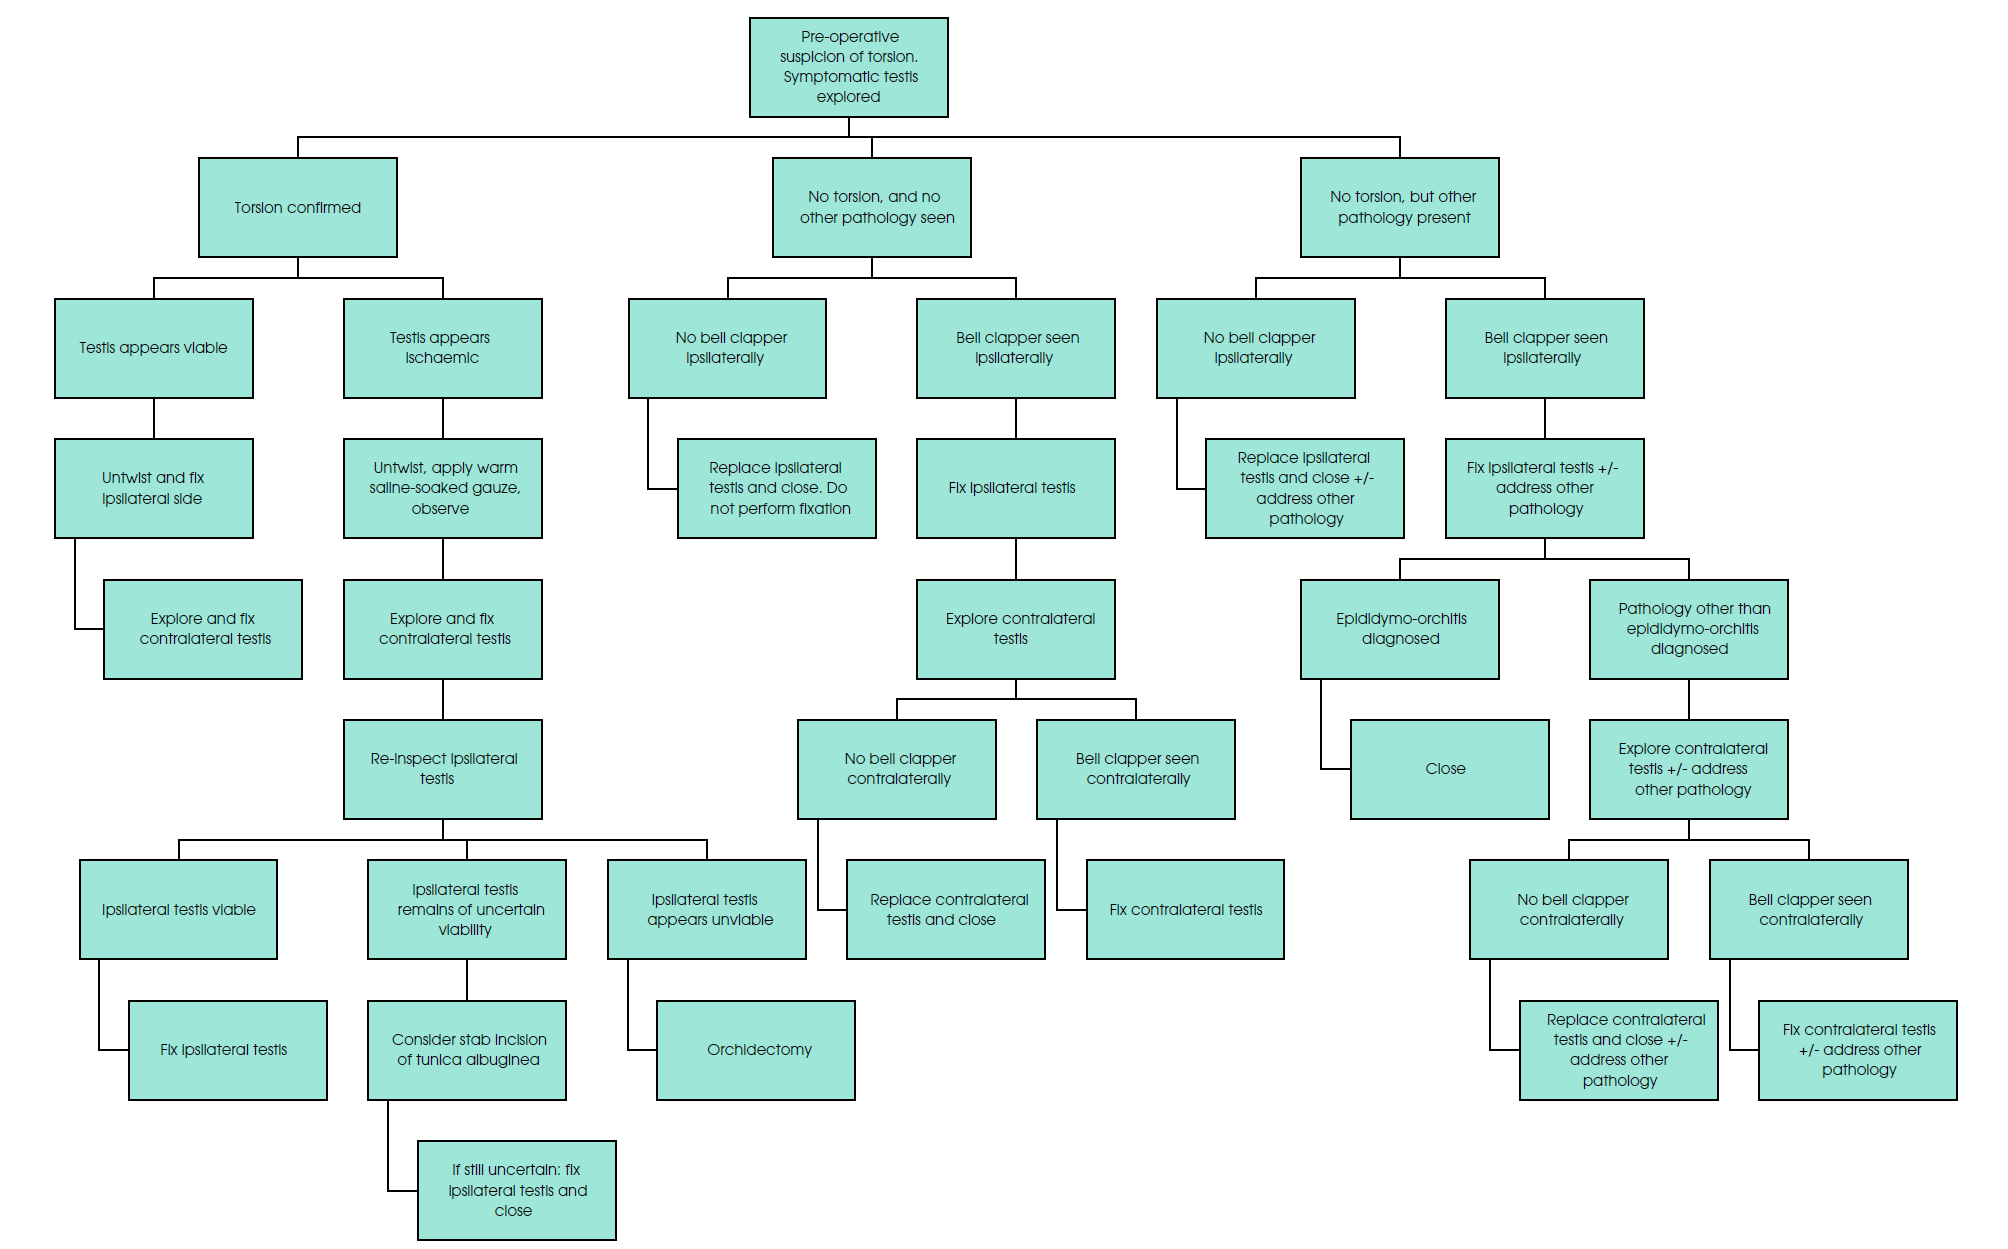 Flow chart for recommended decision making intra-operatively, based on appearance of symptomatic testis